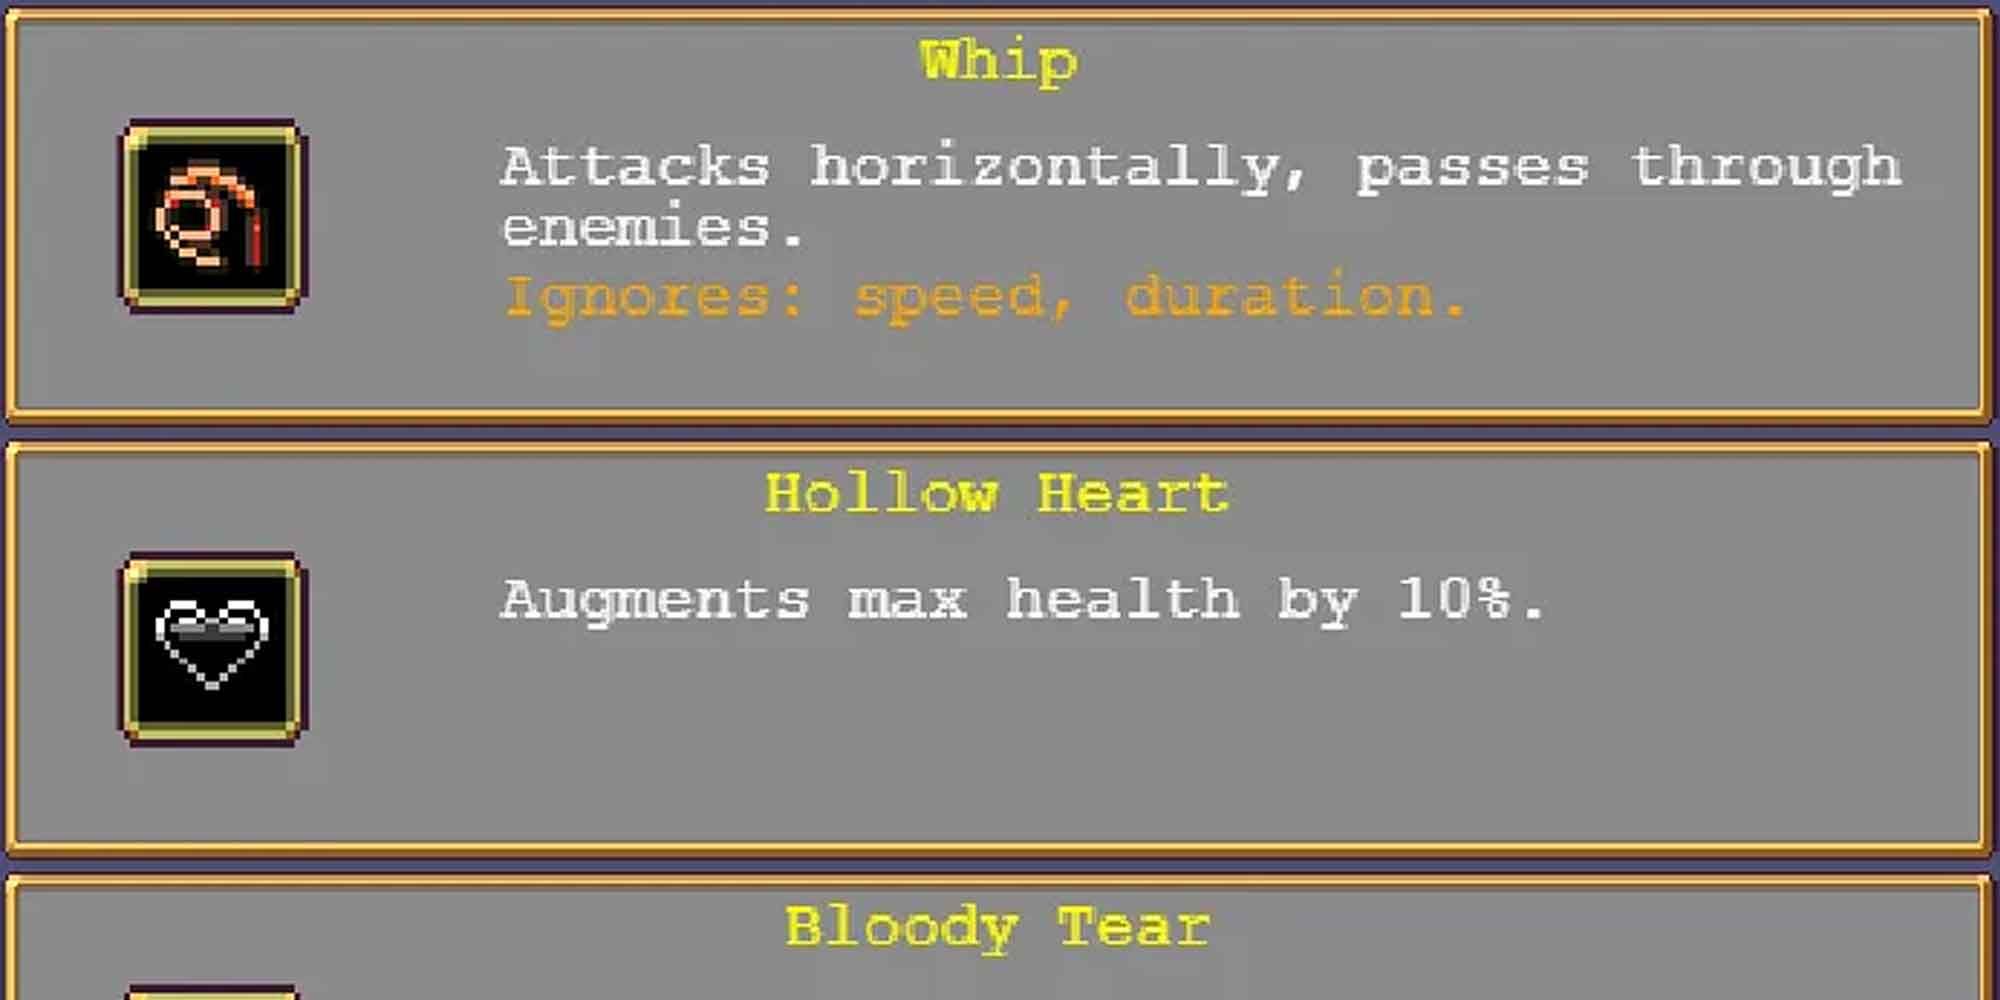 The Hollow Heart accessory in Vampire Survivors